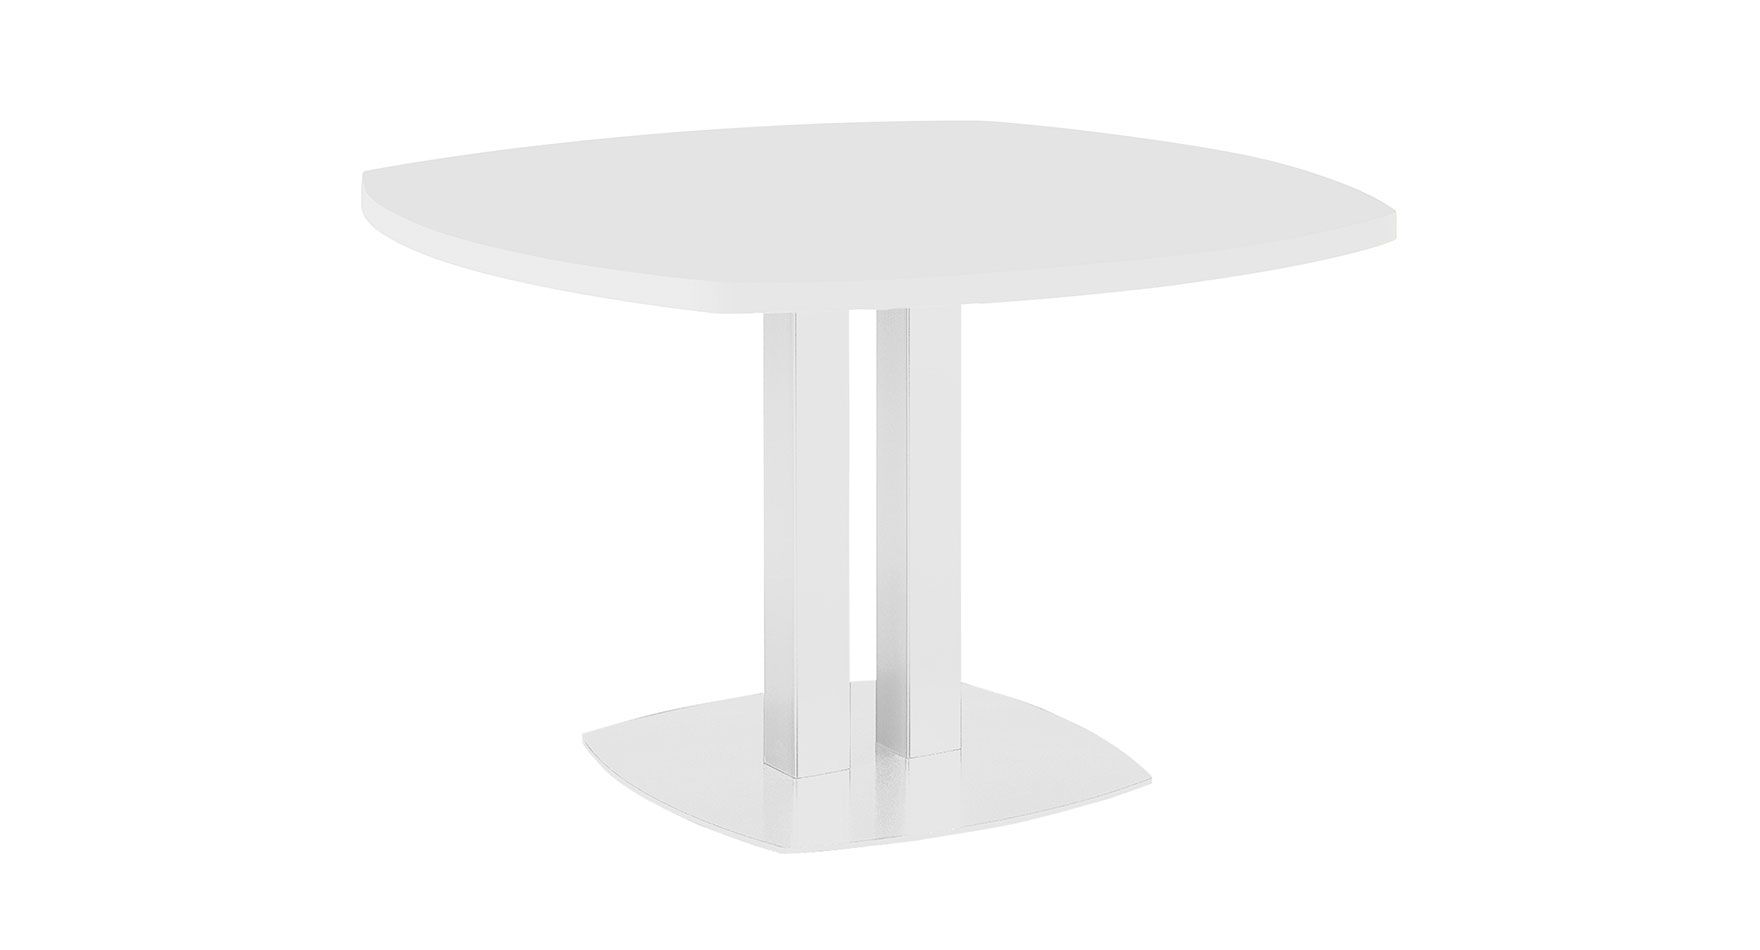 Meeting table - Contemporary office furniture – Gautier Office ...